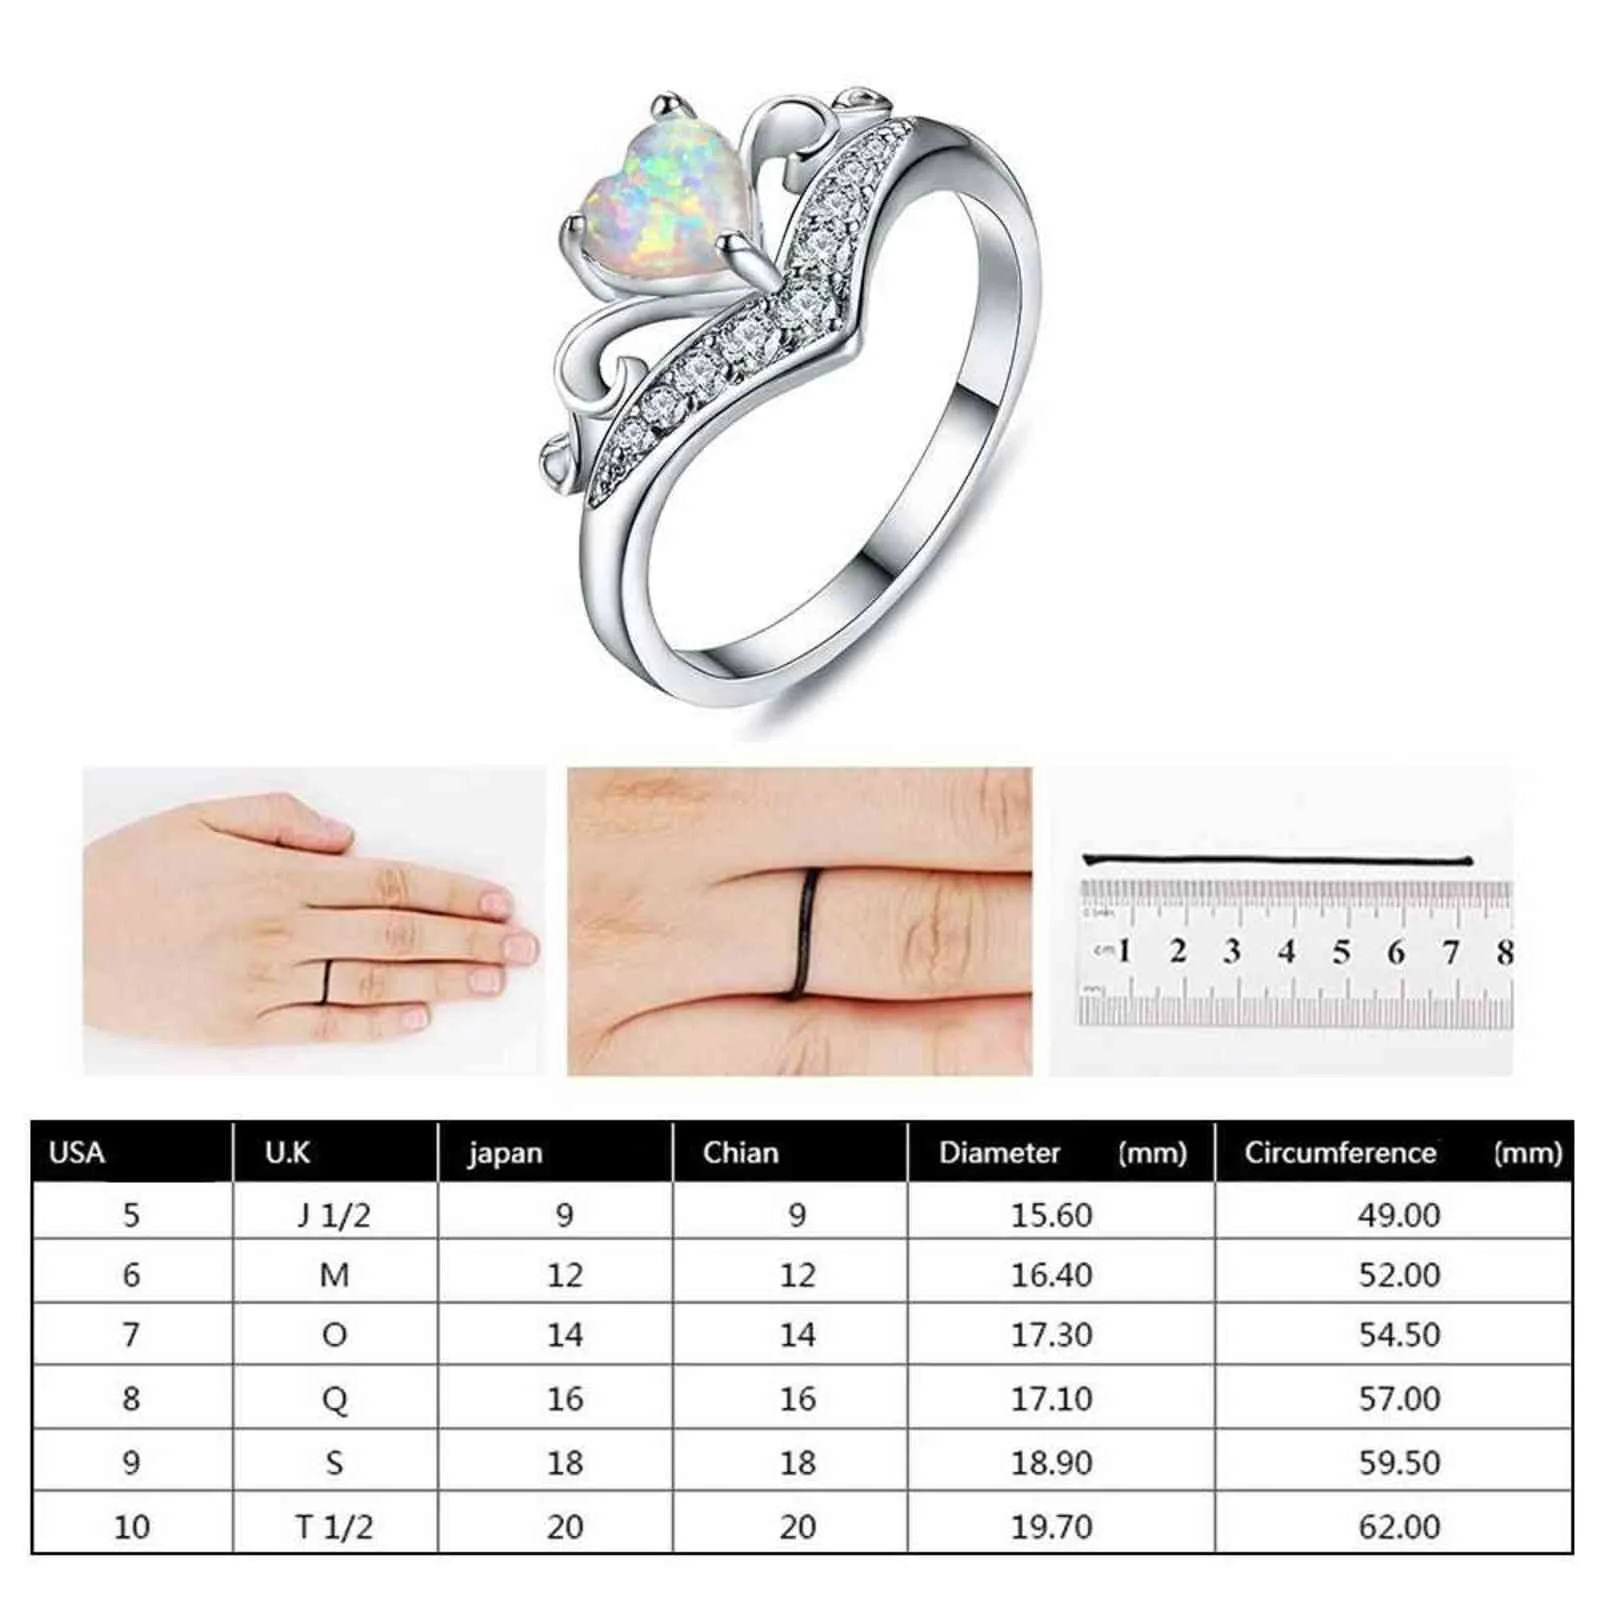 Fashion Valentine's Day Jewelry Wedding Promise Silver Oval Ring for Women Friendship Rings Engagement Ring G1125